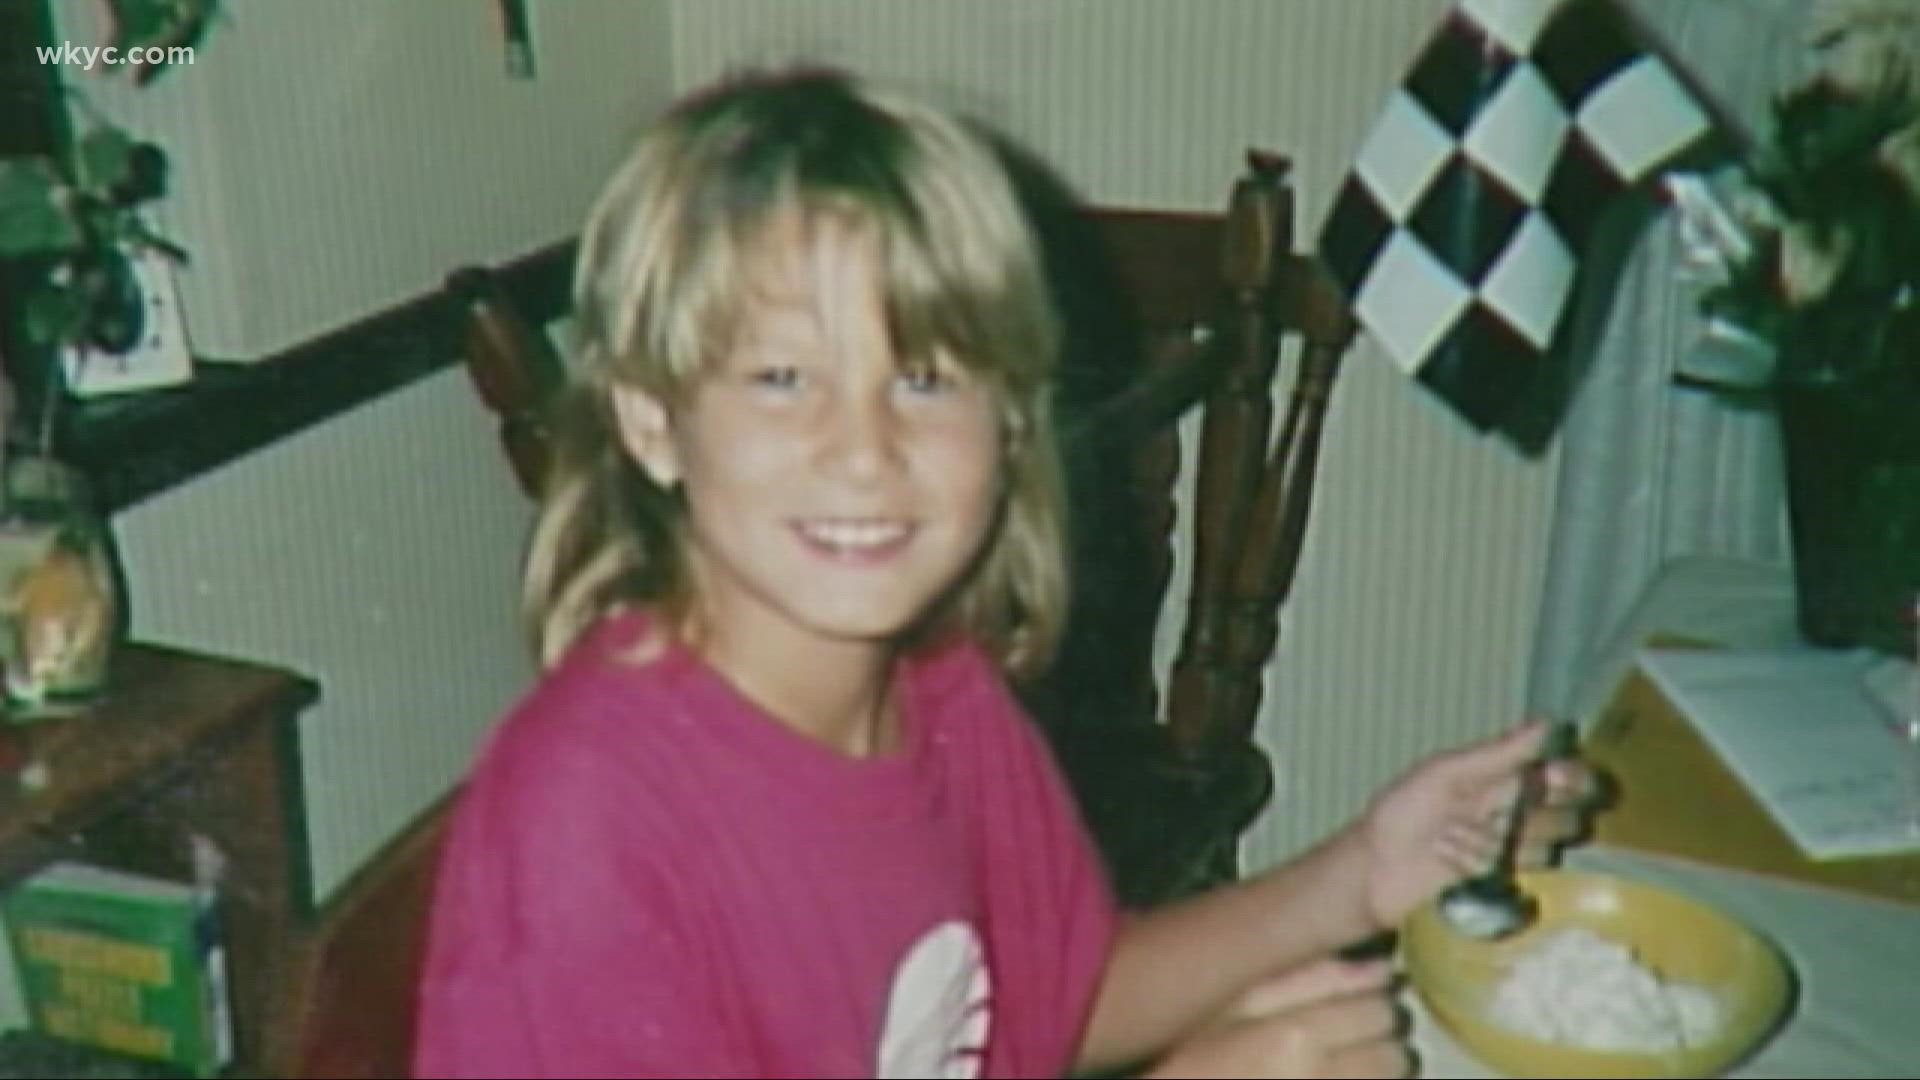 Amy vanished from a Bay Village shopping center on Oct. 27, 1989. Her body was found months later.